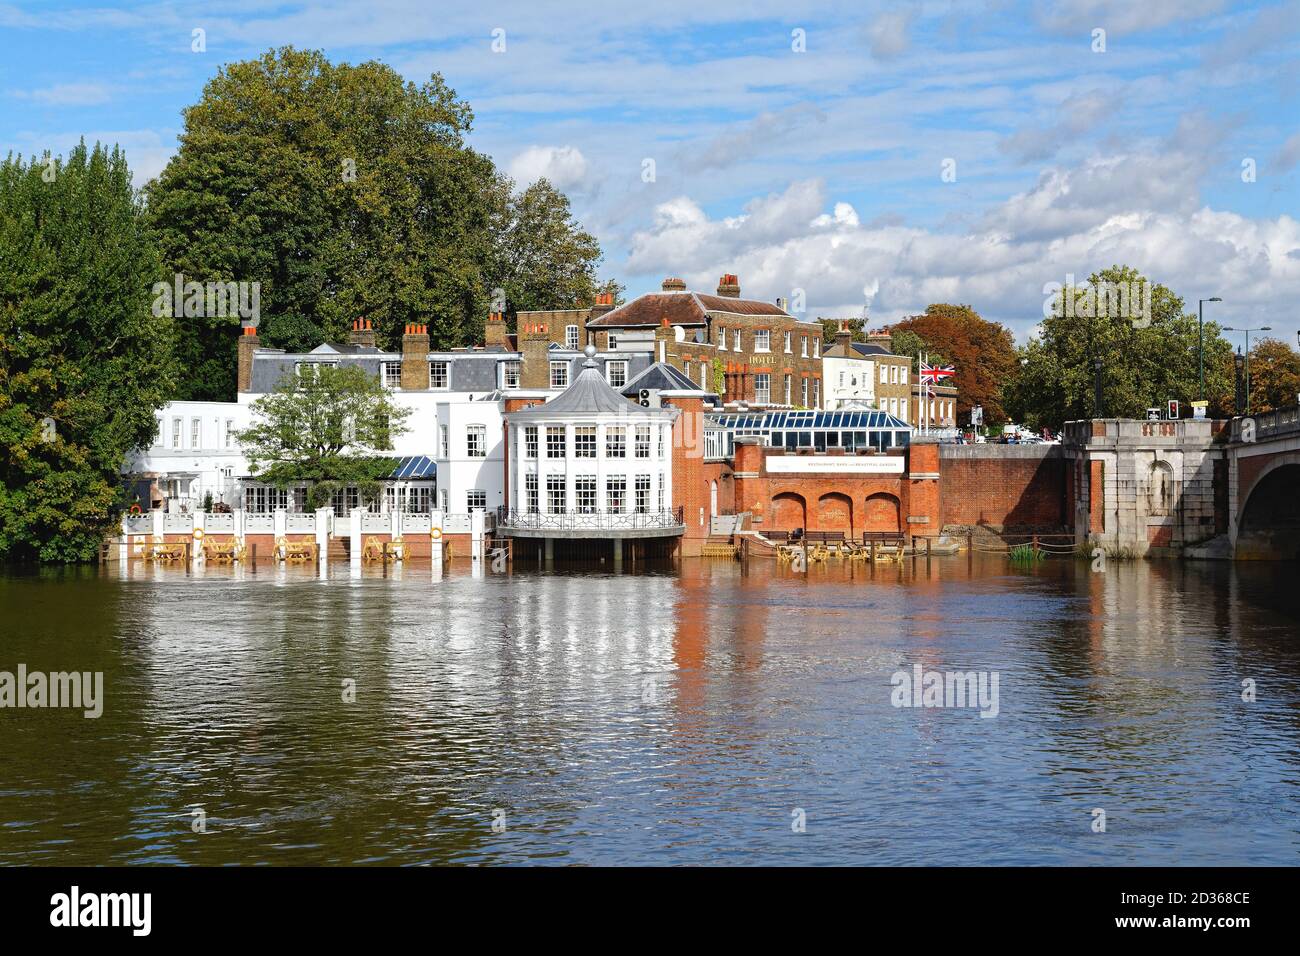 The exterior of the Mitre Hotel with the River Thames in the foreground, Hampton Court Greater London England UK Stock Photo